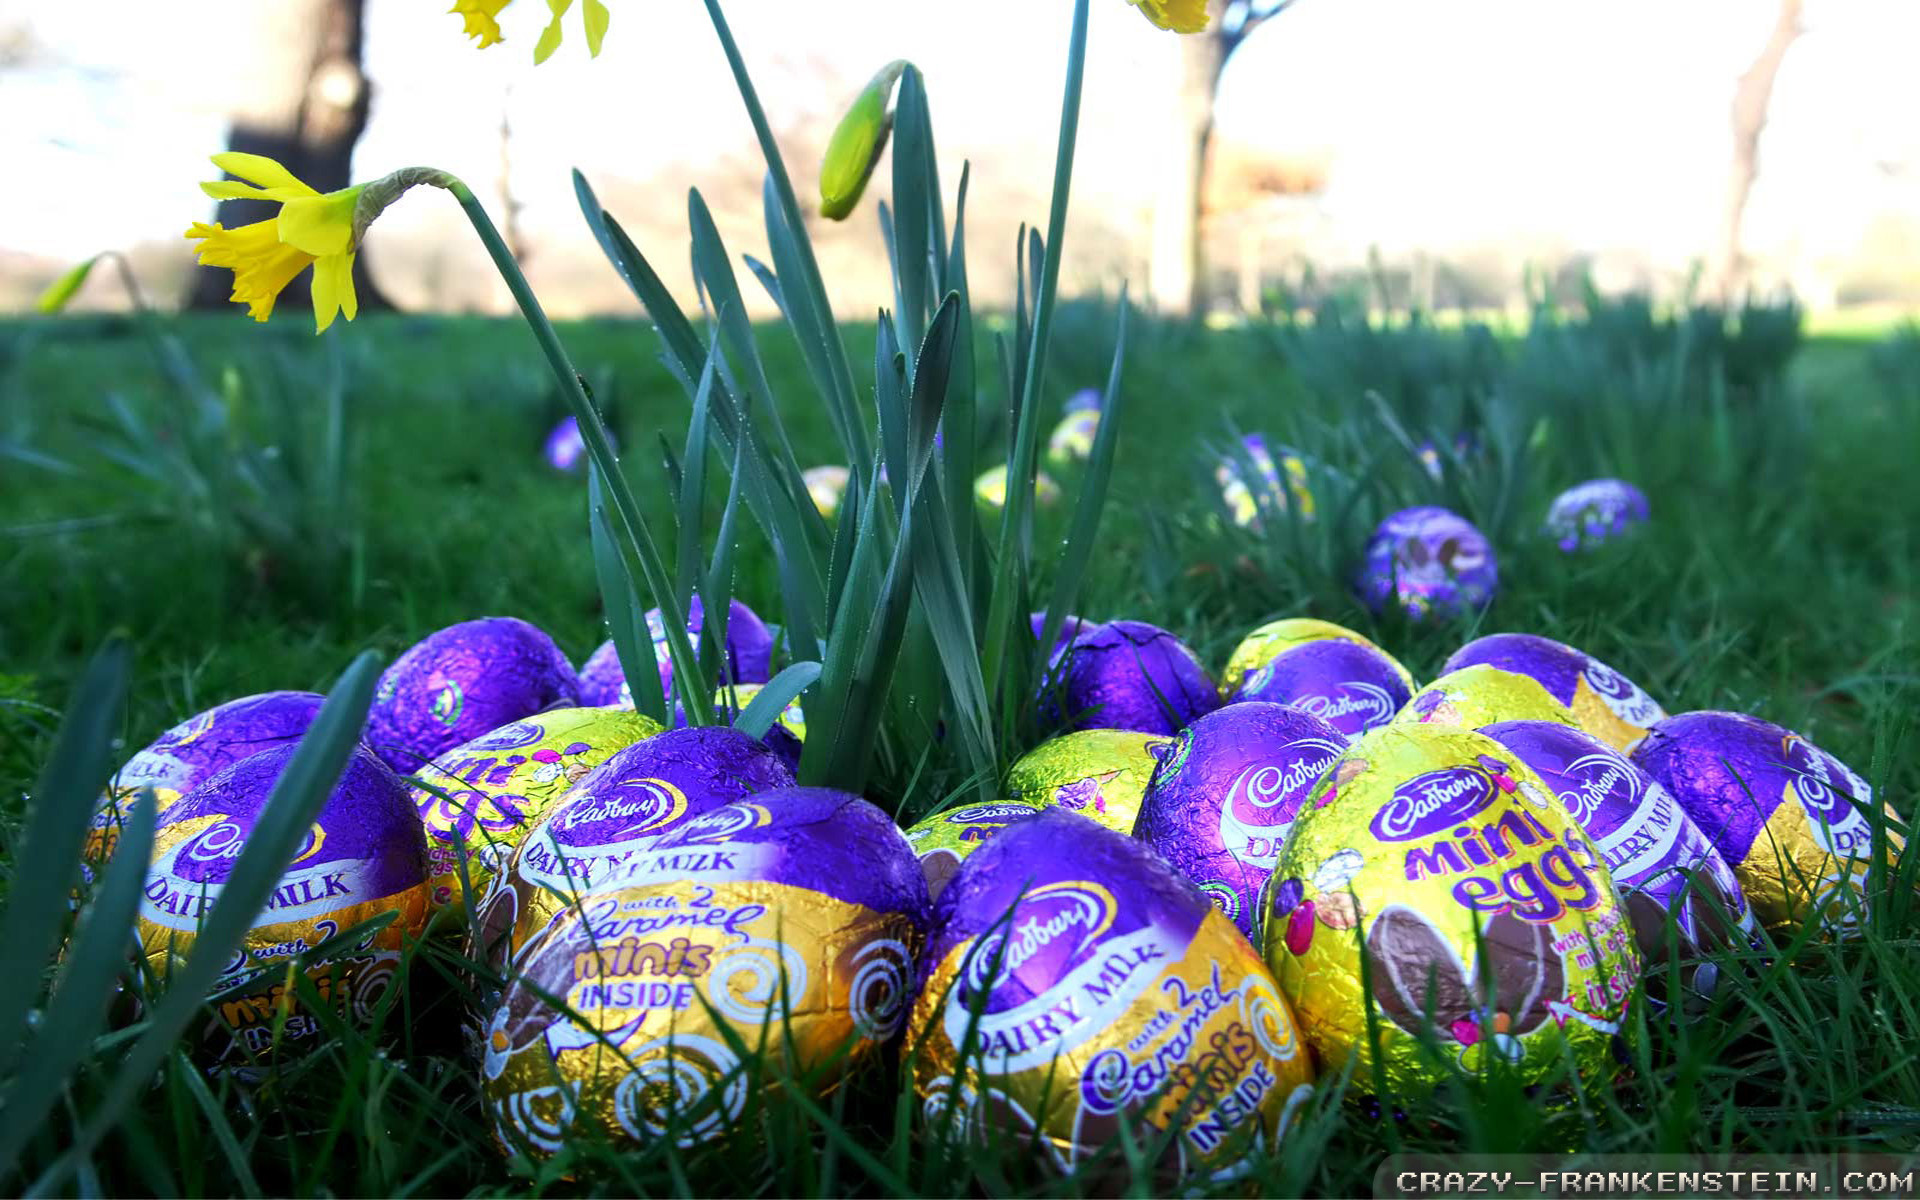 1920x1200 Wallpaper: Easter Eggs Chocolate Resolution: 1024x768 | 1280x1024 |  1600x1200. Widescreen Res: 1440x900 | 1680x1050 | 